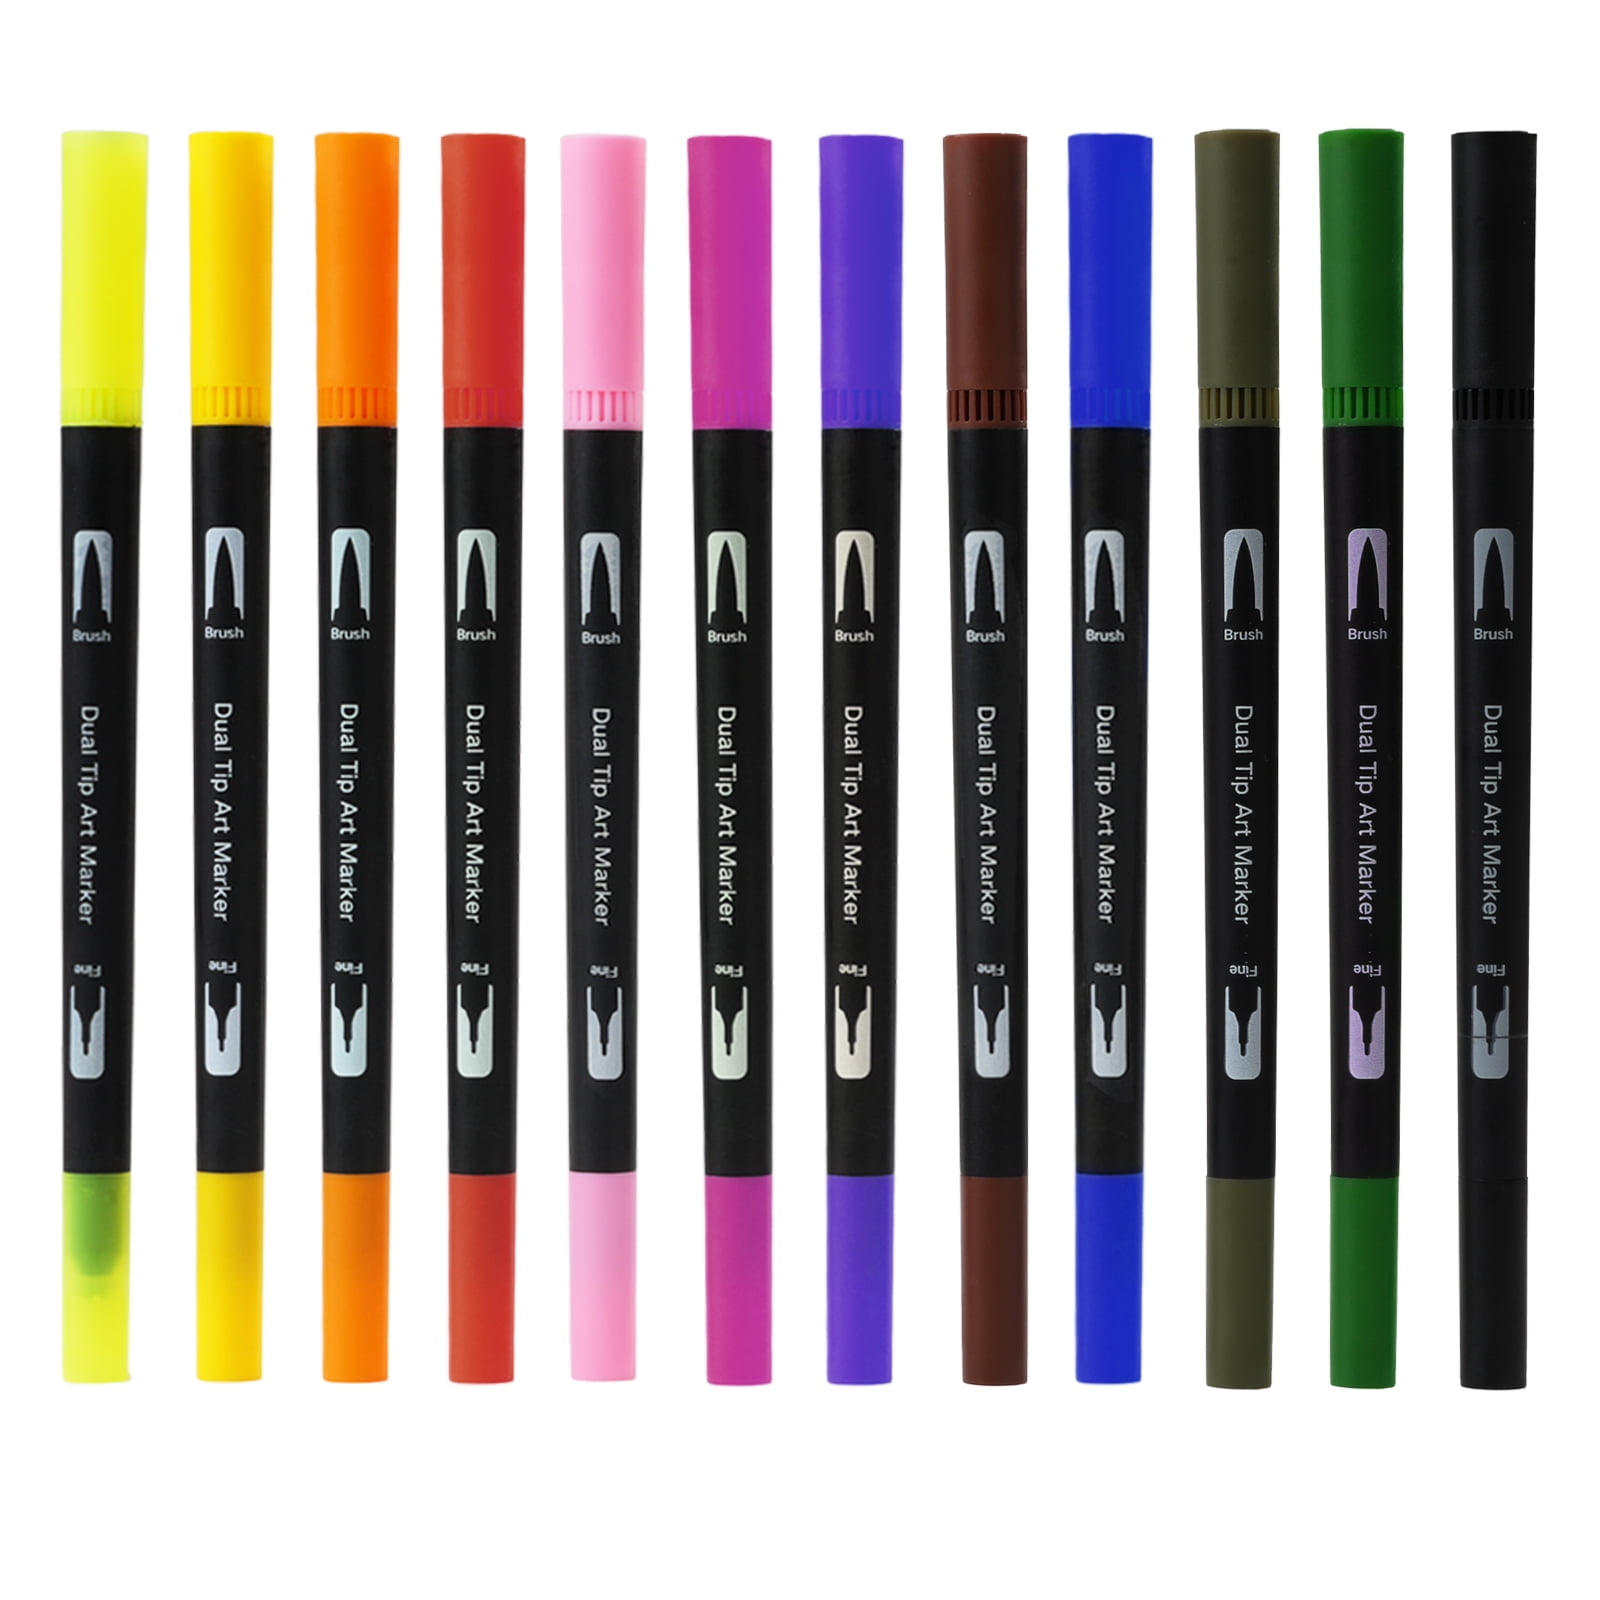 MoHern Markers for Adult Coloring, Dual Brush Markers Sets, 24pcs Colored Pens, Art Supplies for Kids, Size: 12 x 6.81 x 0.59, Black